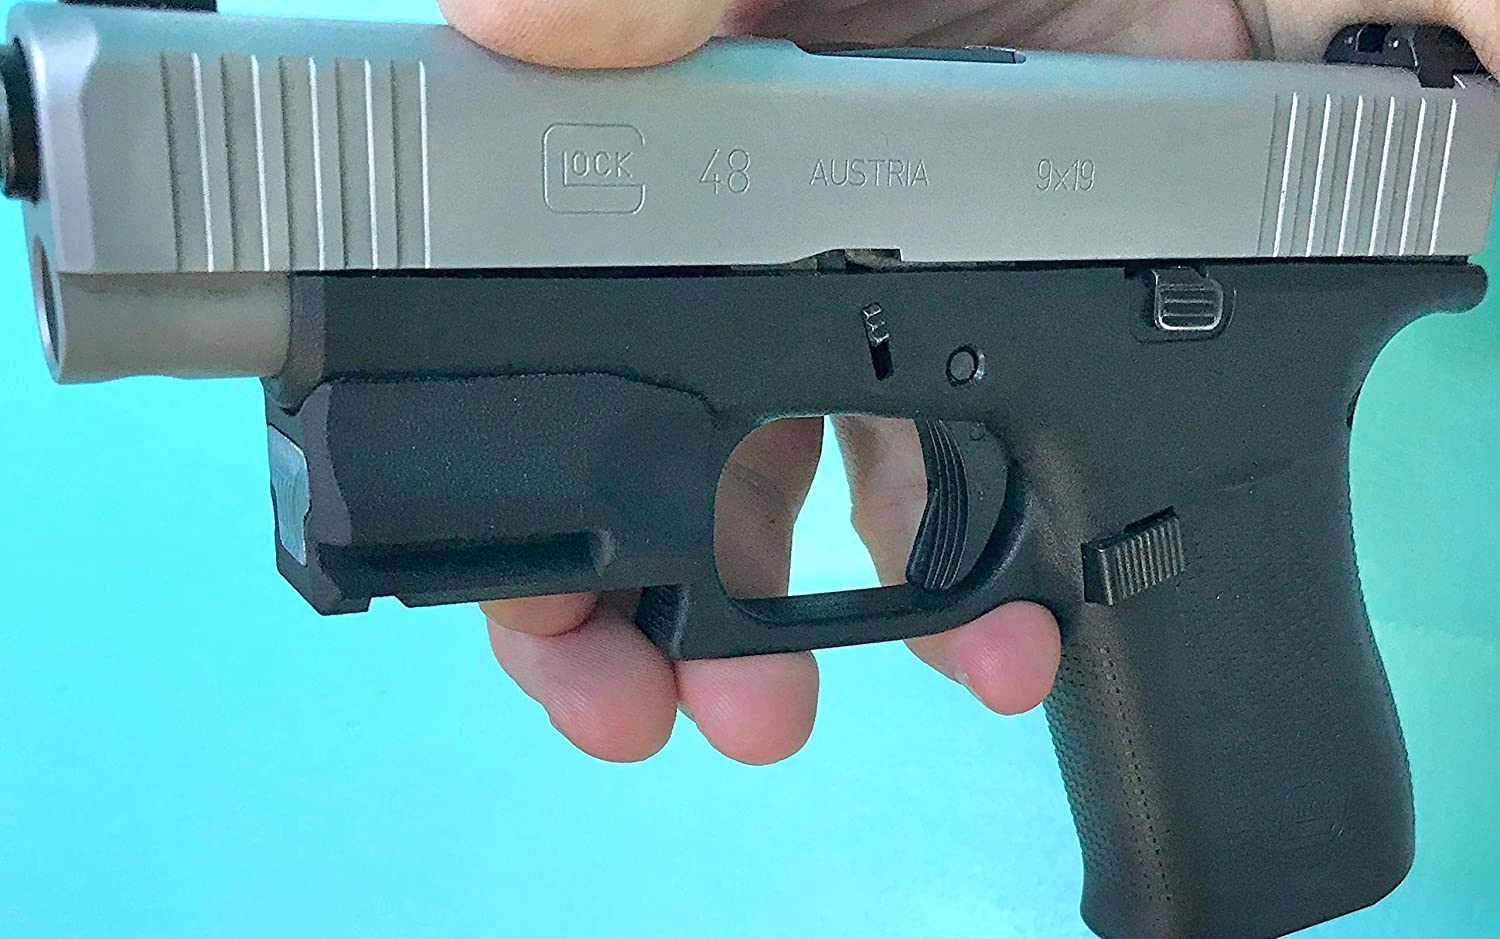 The Balanced Rail System for the Glock 43X/48 from KT Tactical Design